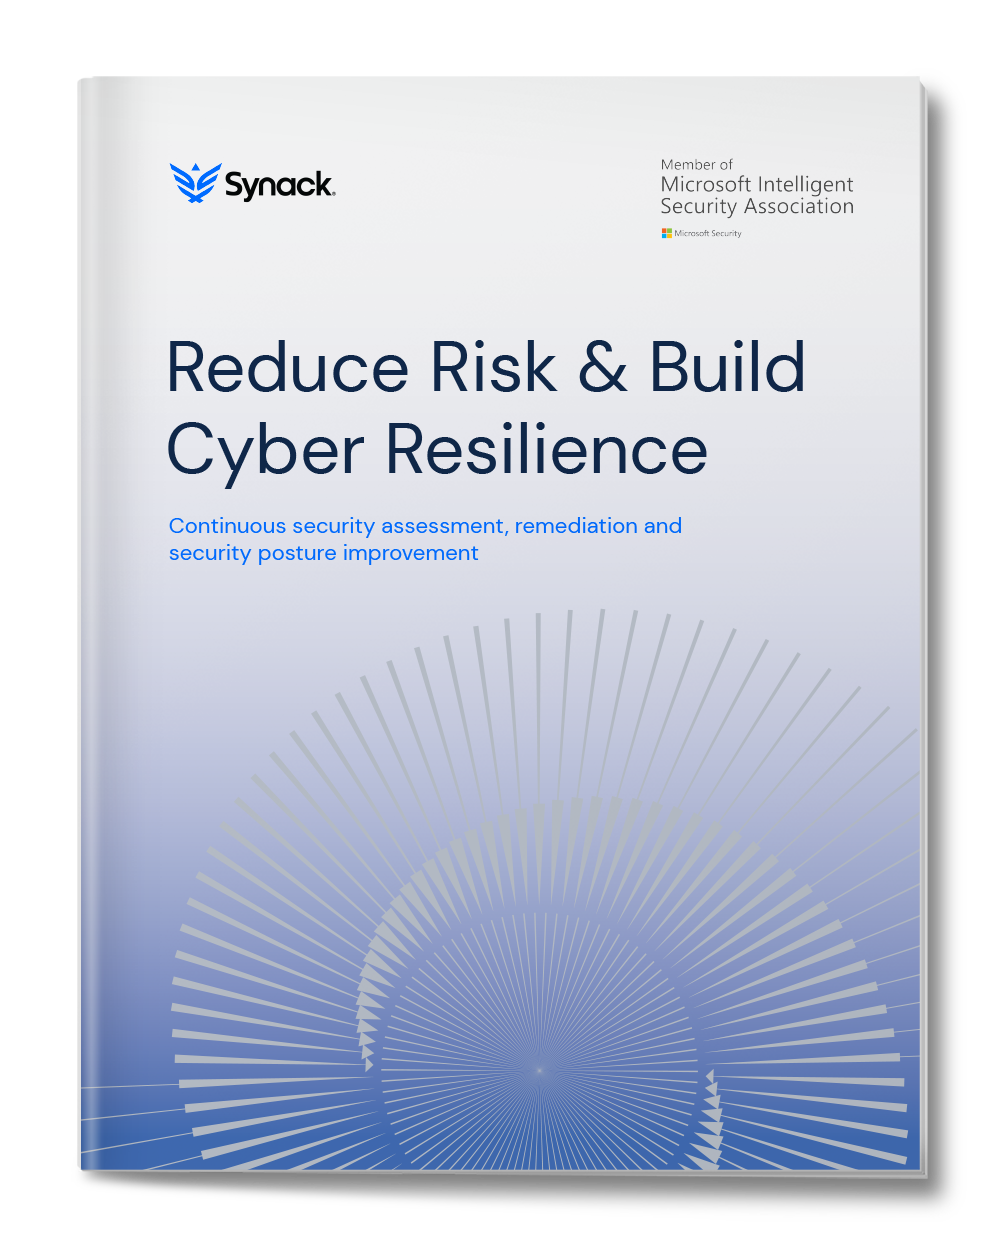 synack-msft-cyber-resilience-guide-tb